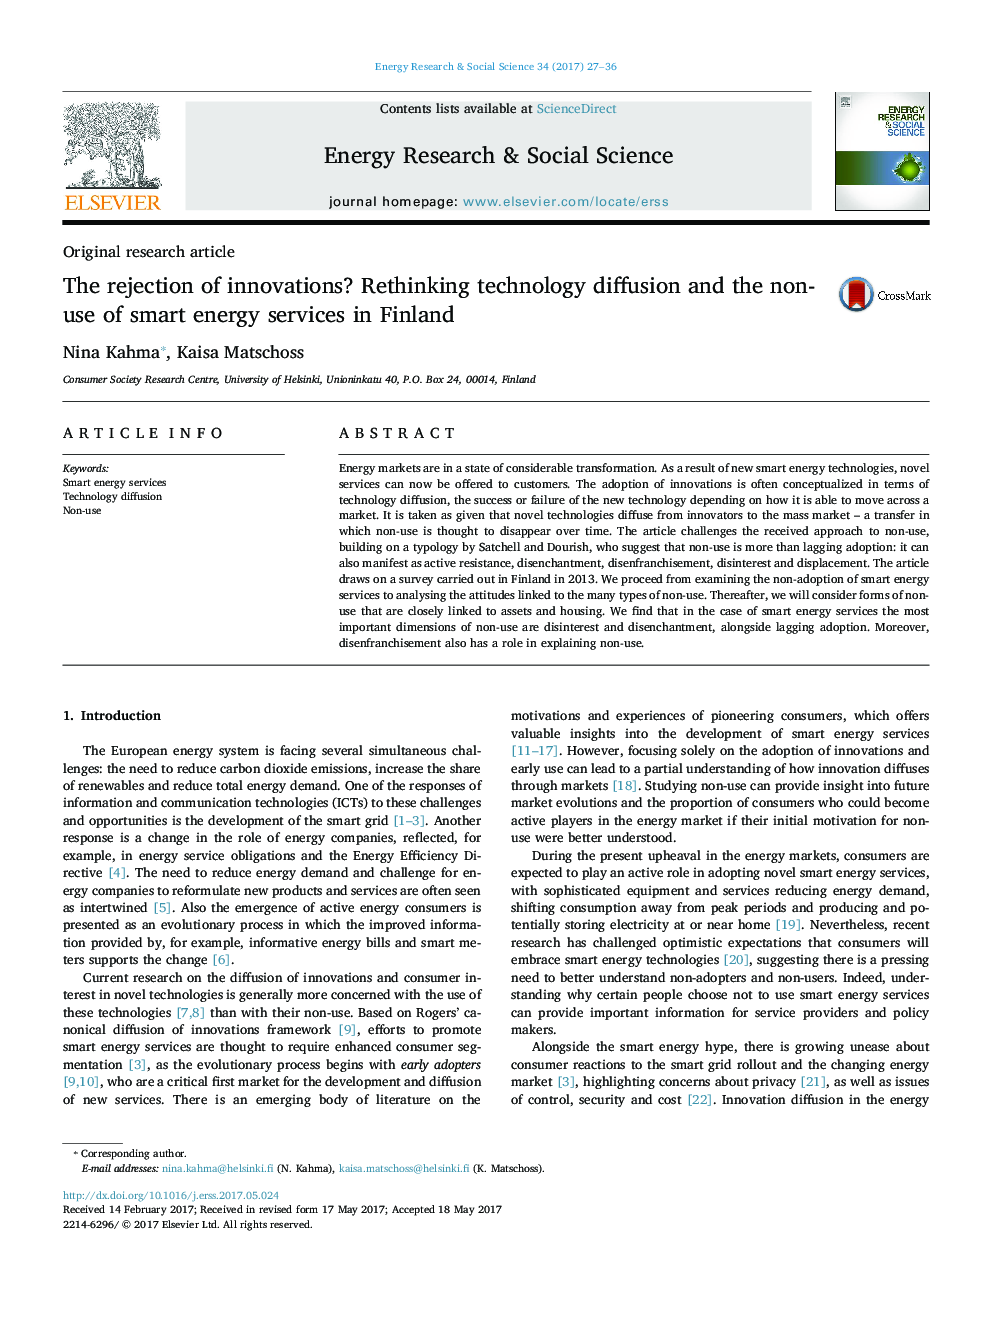 The rejection of innovations? Rethinking technology diffusion and the non-use of smart energy services in Finland